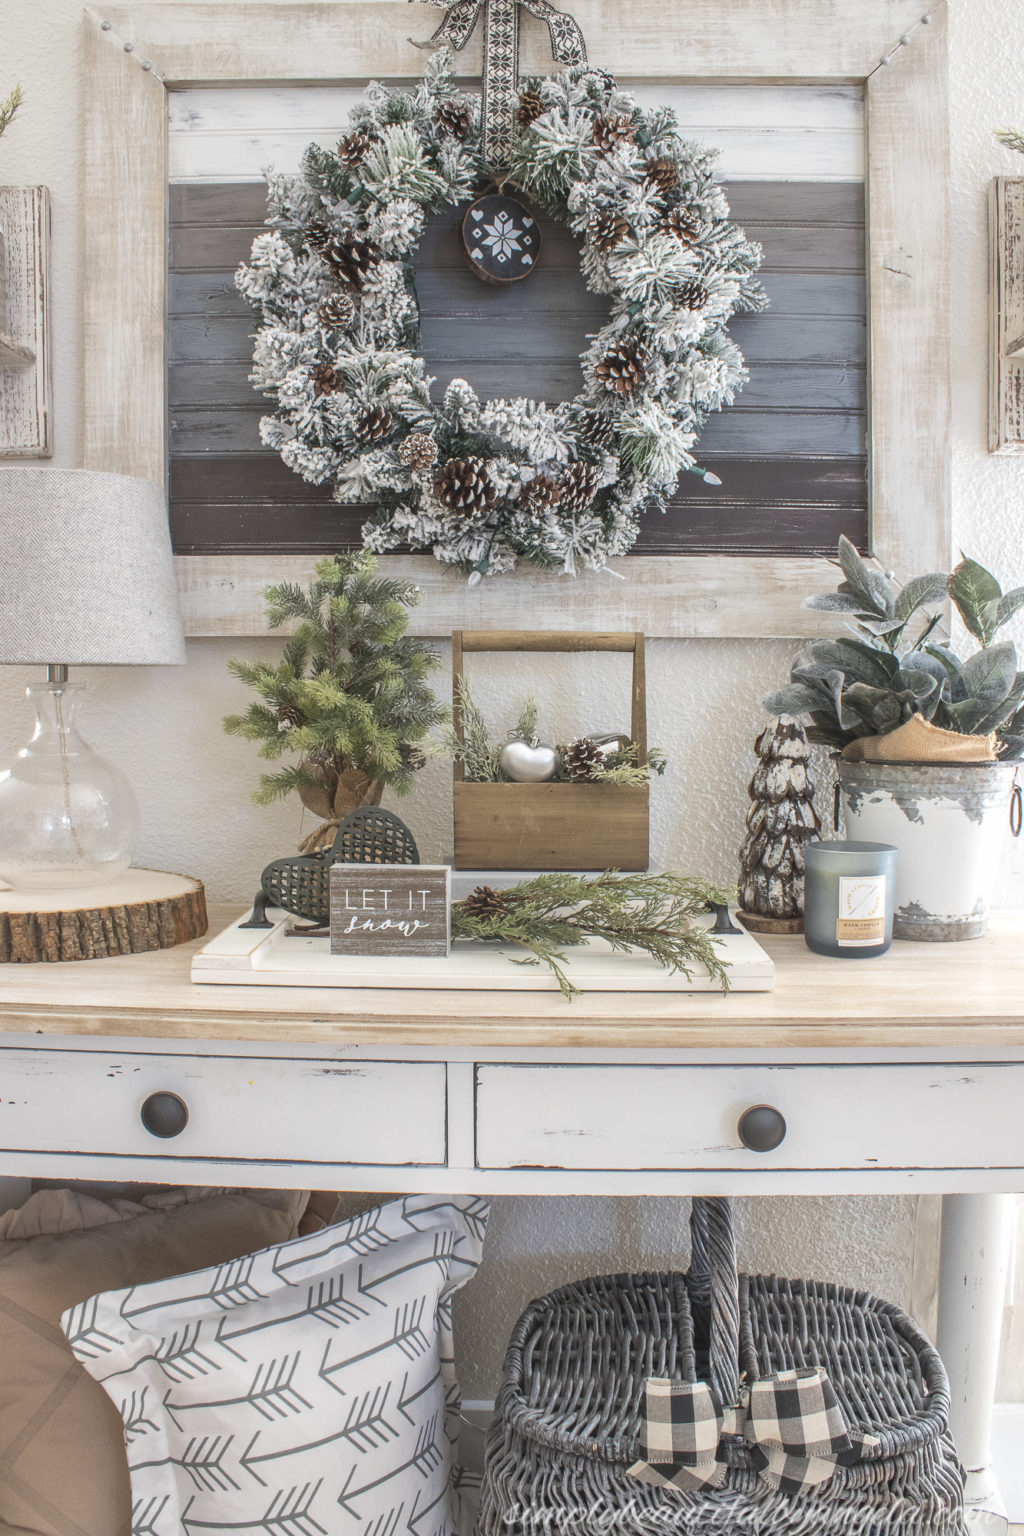 Transitioning from Christmas to Winter/Valentines Decor